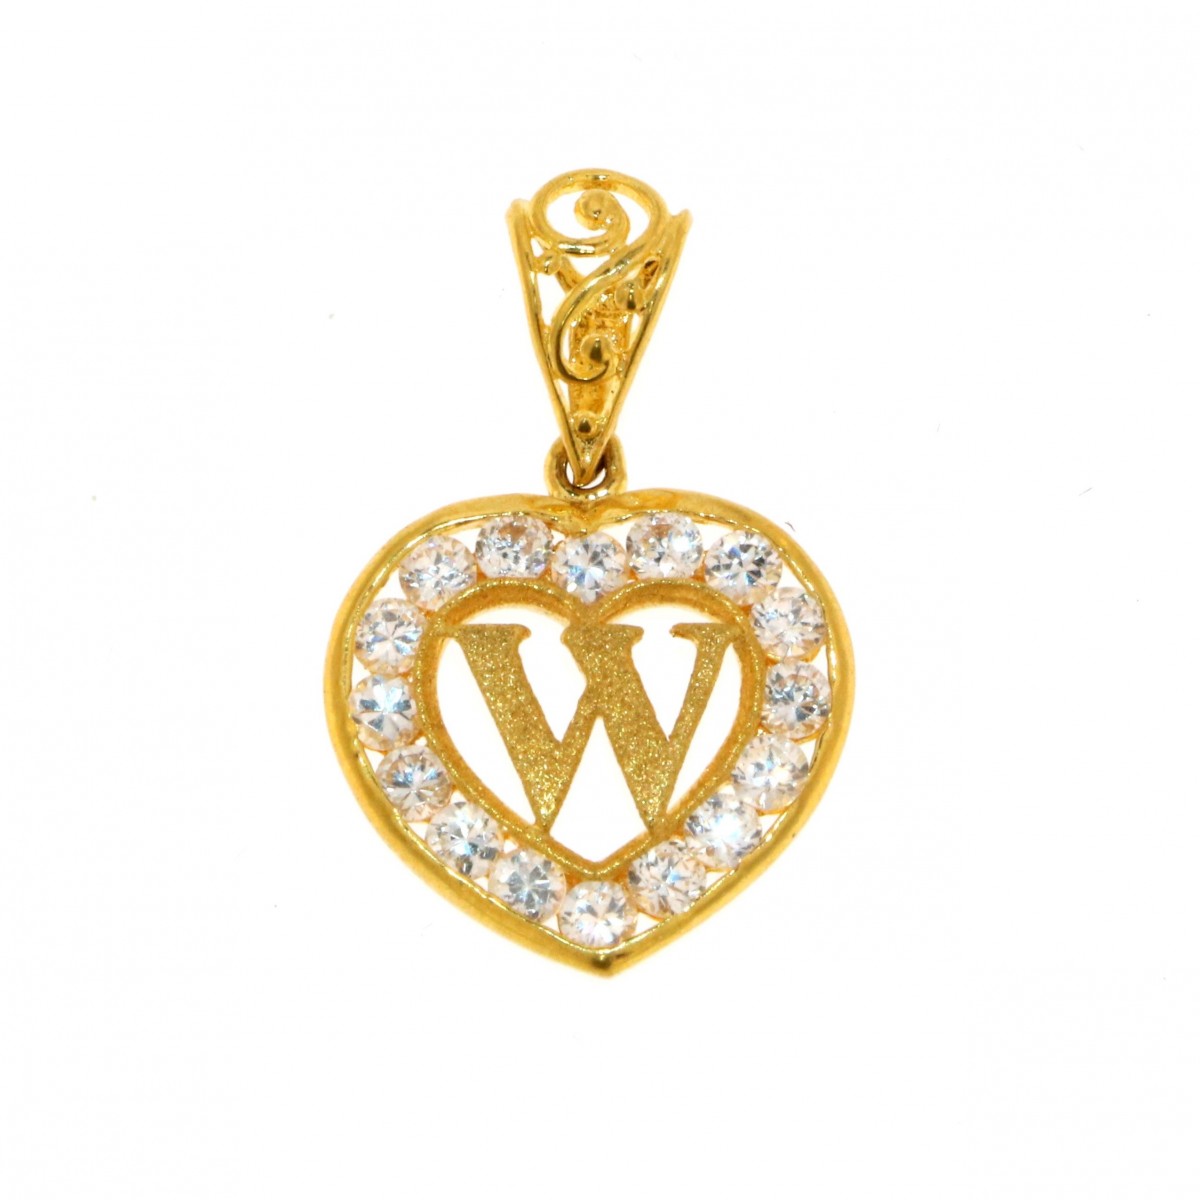 22ct Real Gold Asian/Indian/Pakistani Style 'W' Heart Pendant